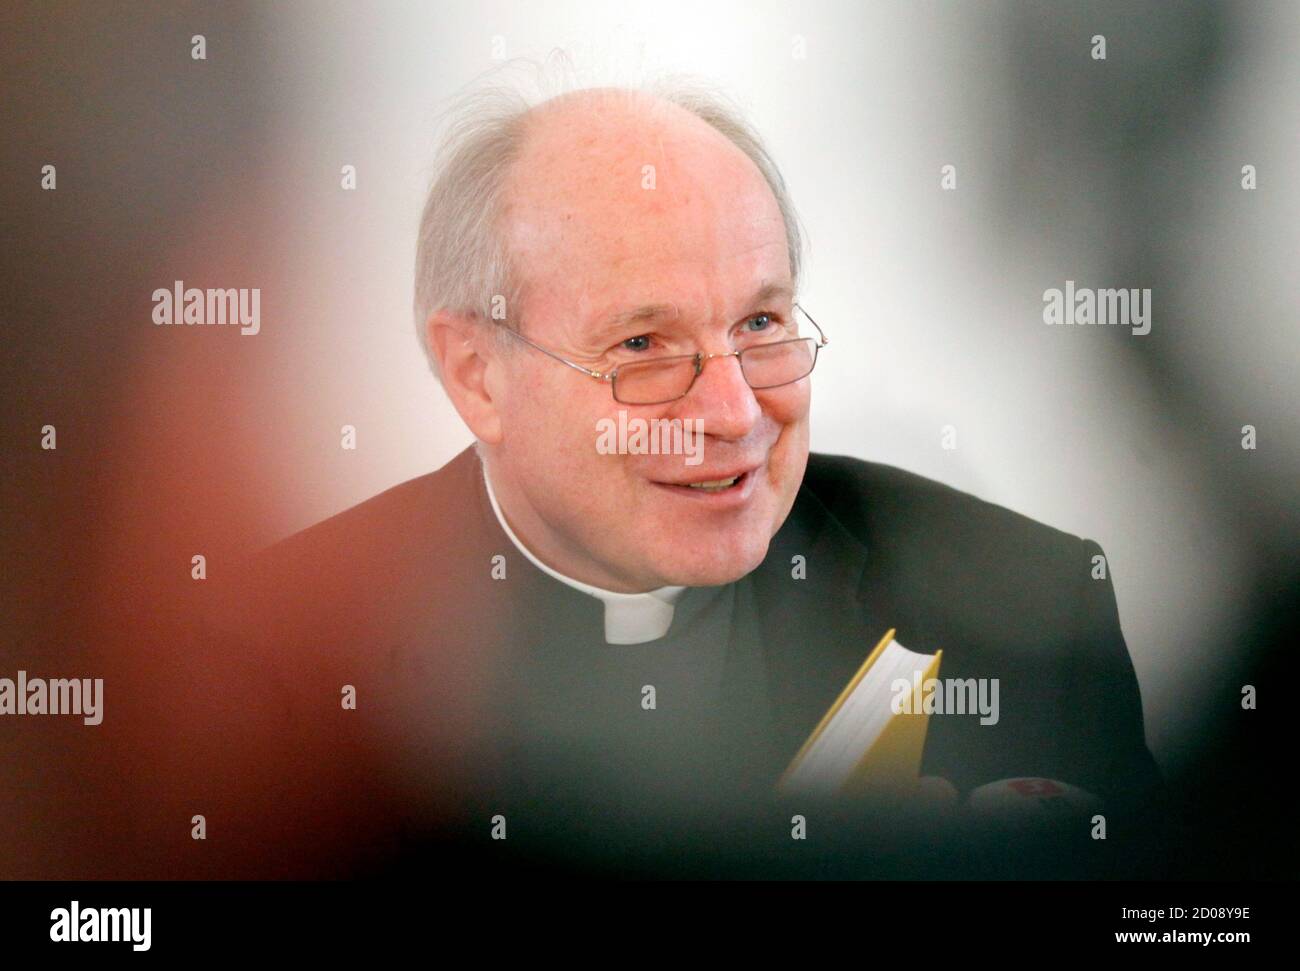 Cardinal Christoph Schoenborn, Archbishop of Vienna, briefs the media during a news conference in Vienna March 23, 2012.   REUTERS/Herwig Prammer  (AUSTRIA - Tags: POLITICS RELIGION) Stock Photo